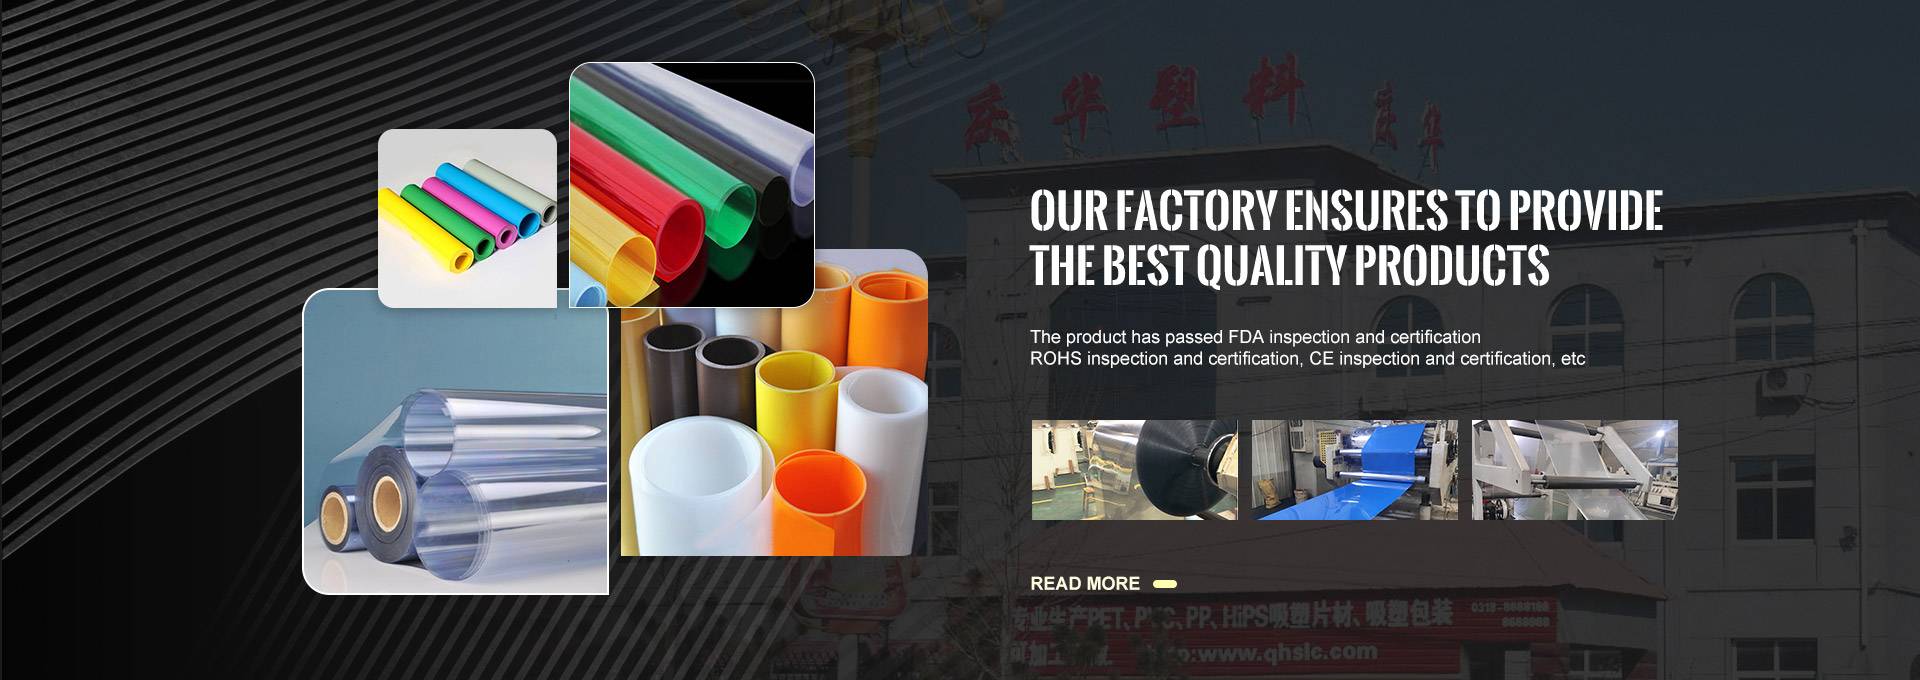 Our factory ensures to provide the best quality products